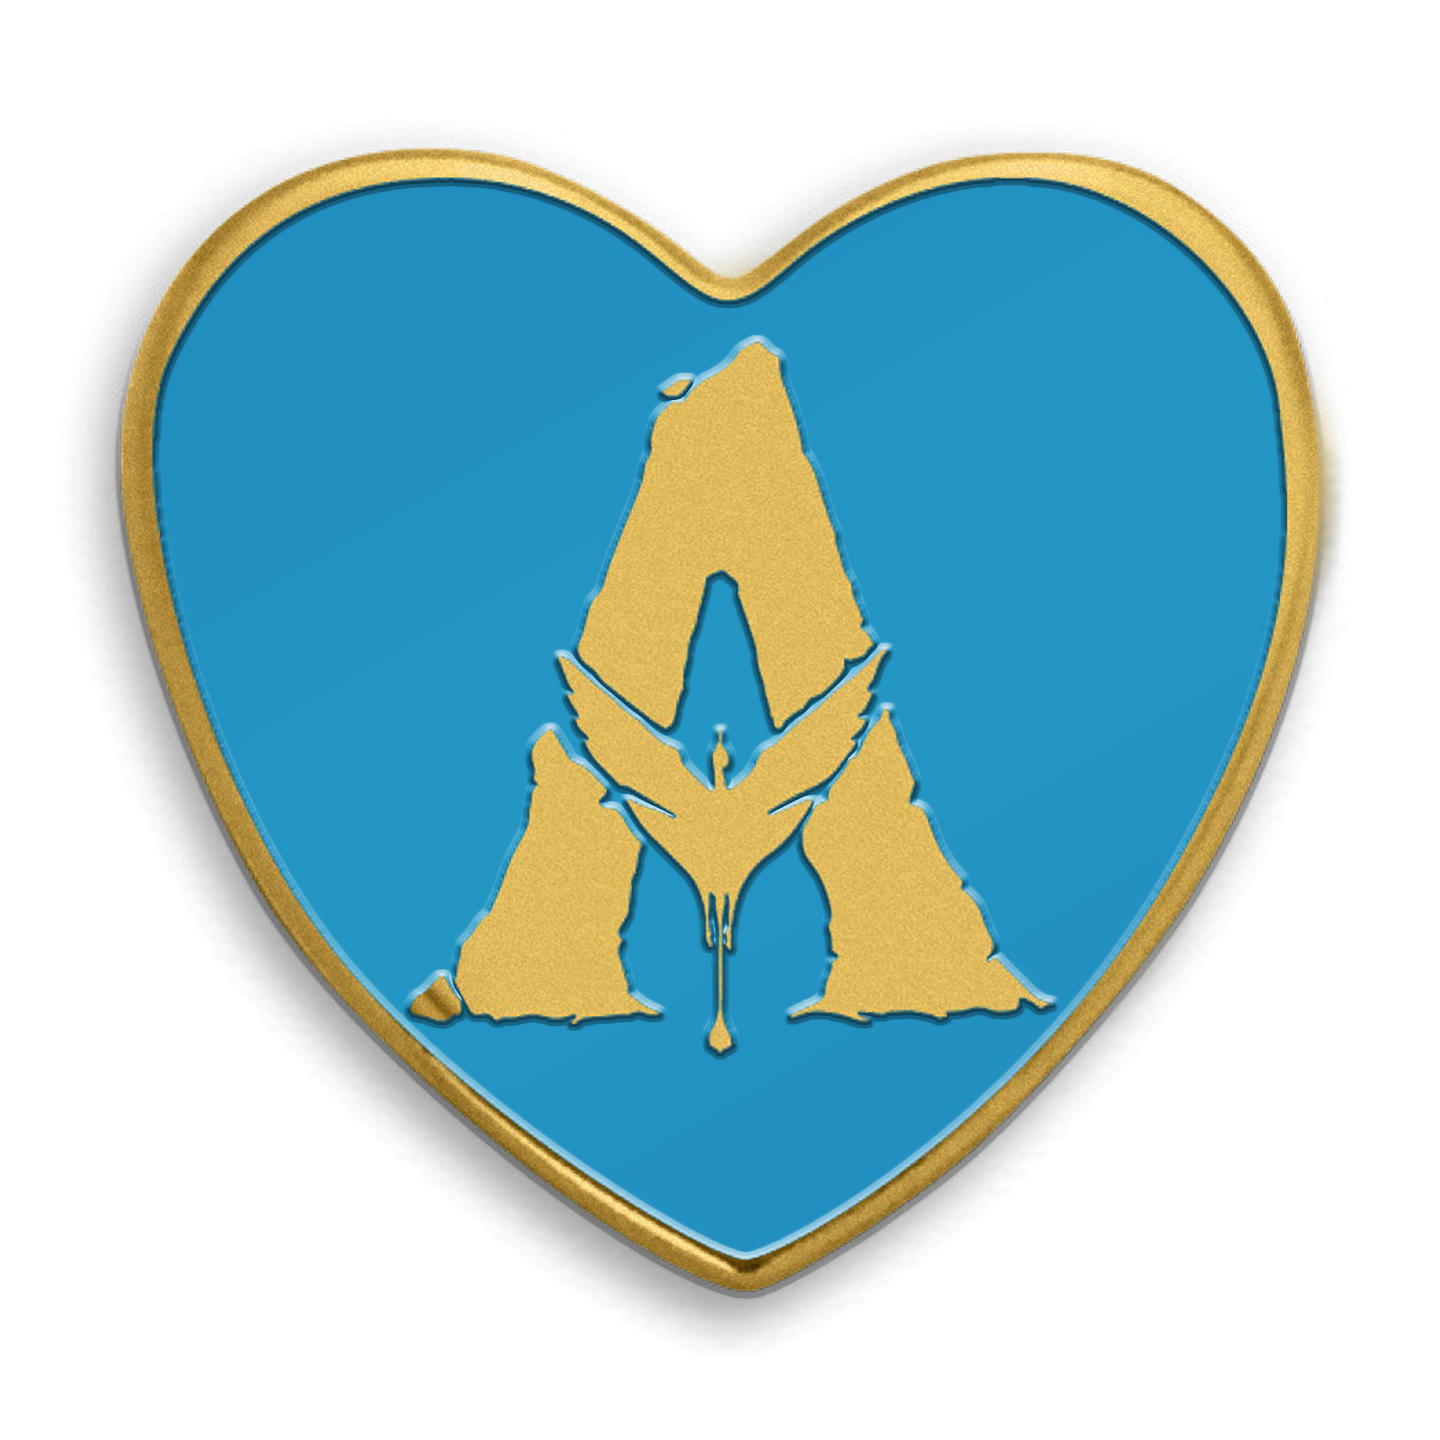 2022 'Avatar: The Way of Water' Variety Gold Heart Pin